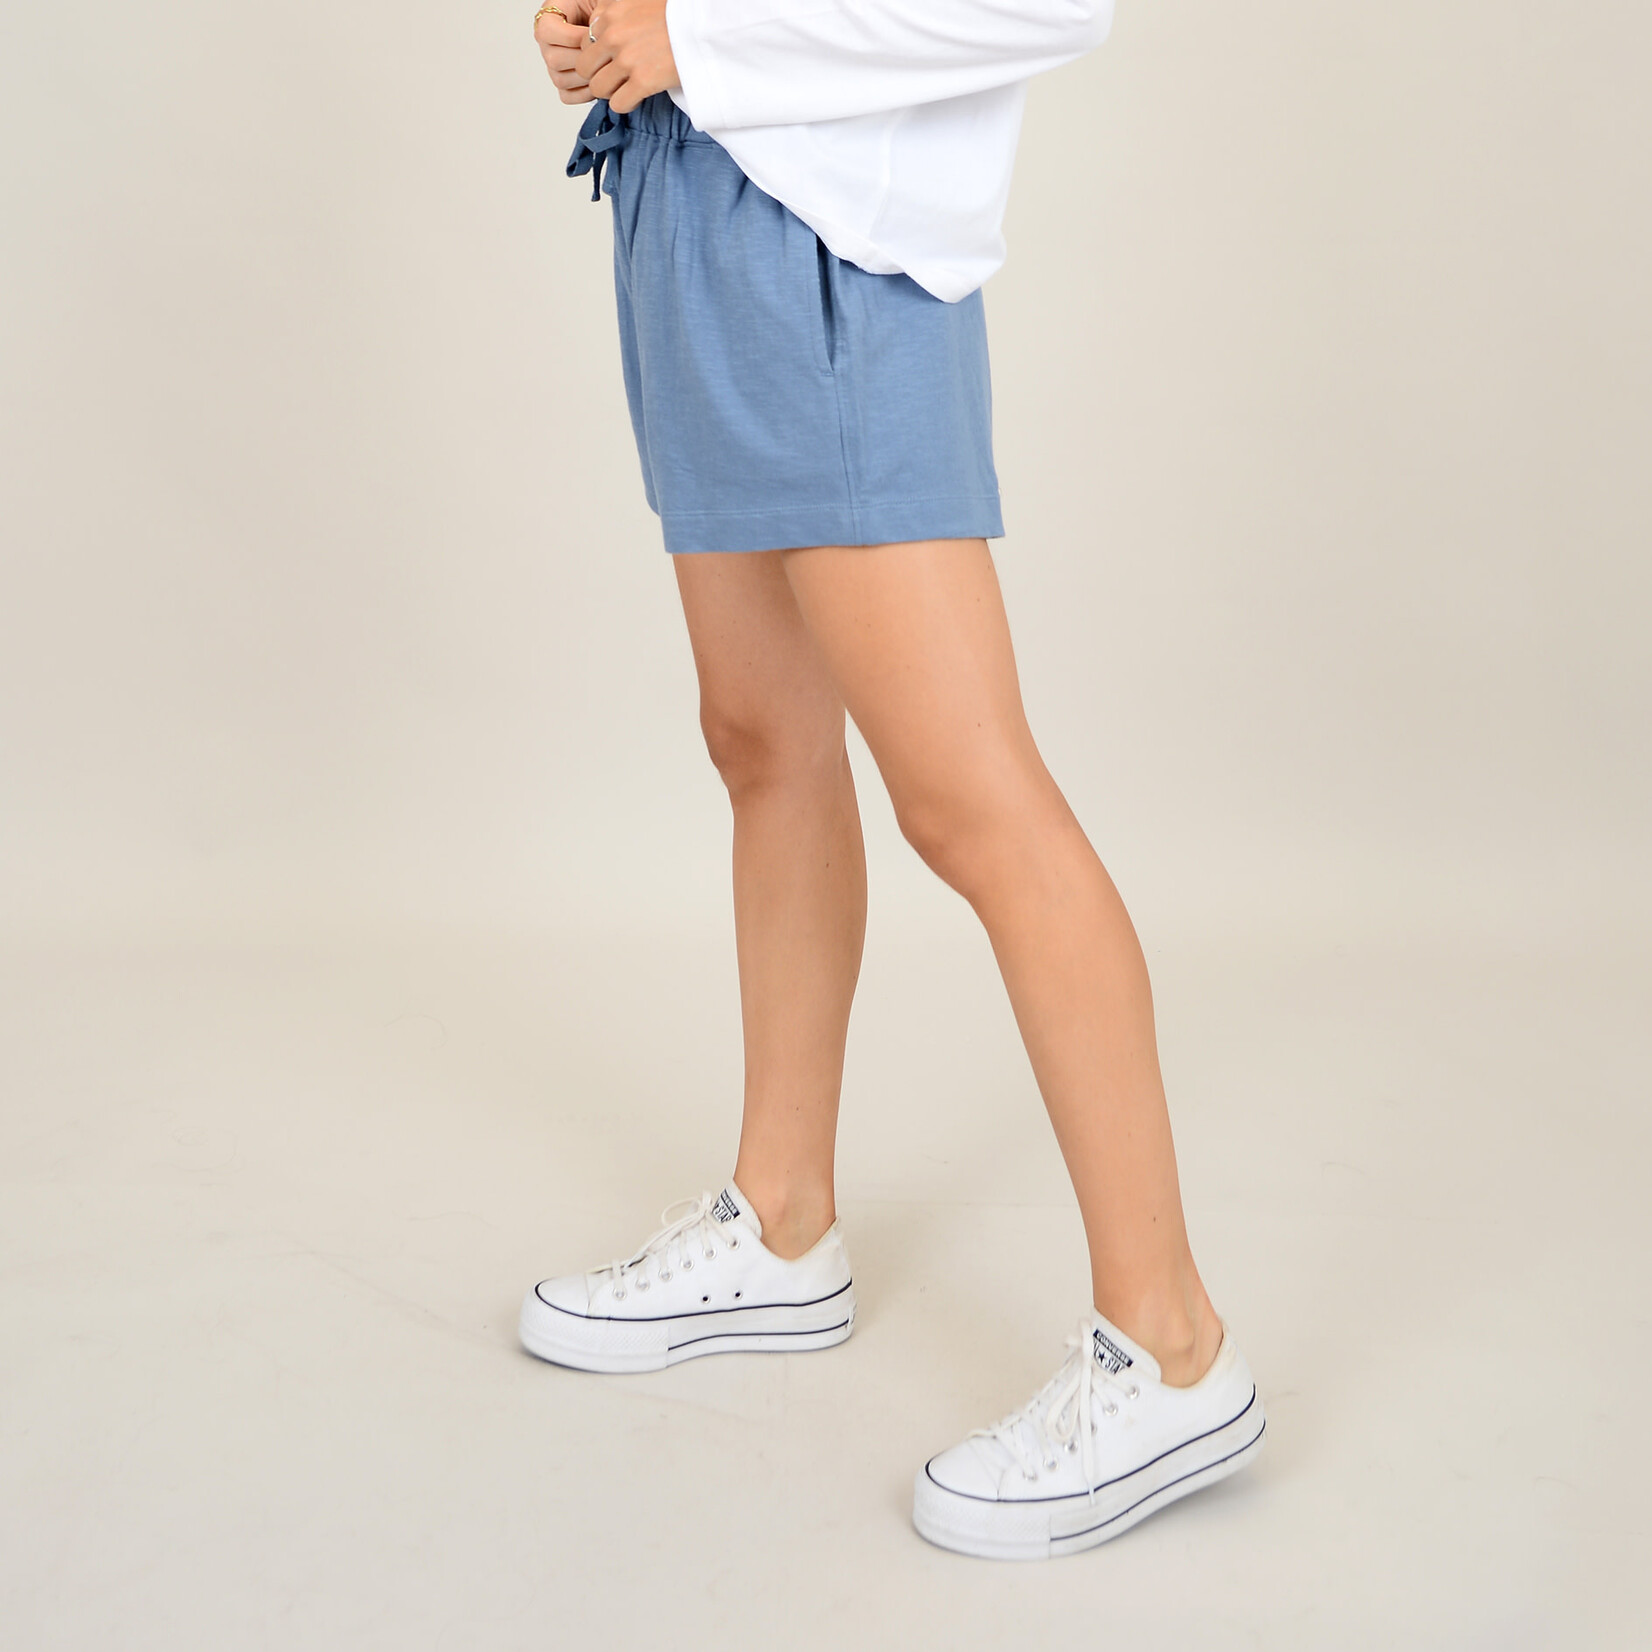 Rd Style Shorty Shorts